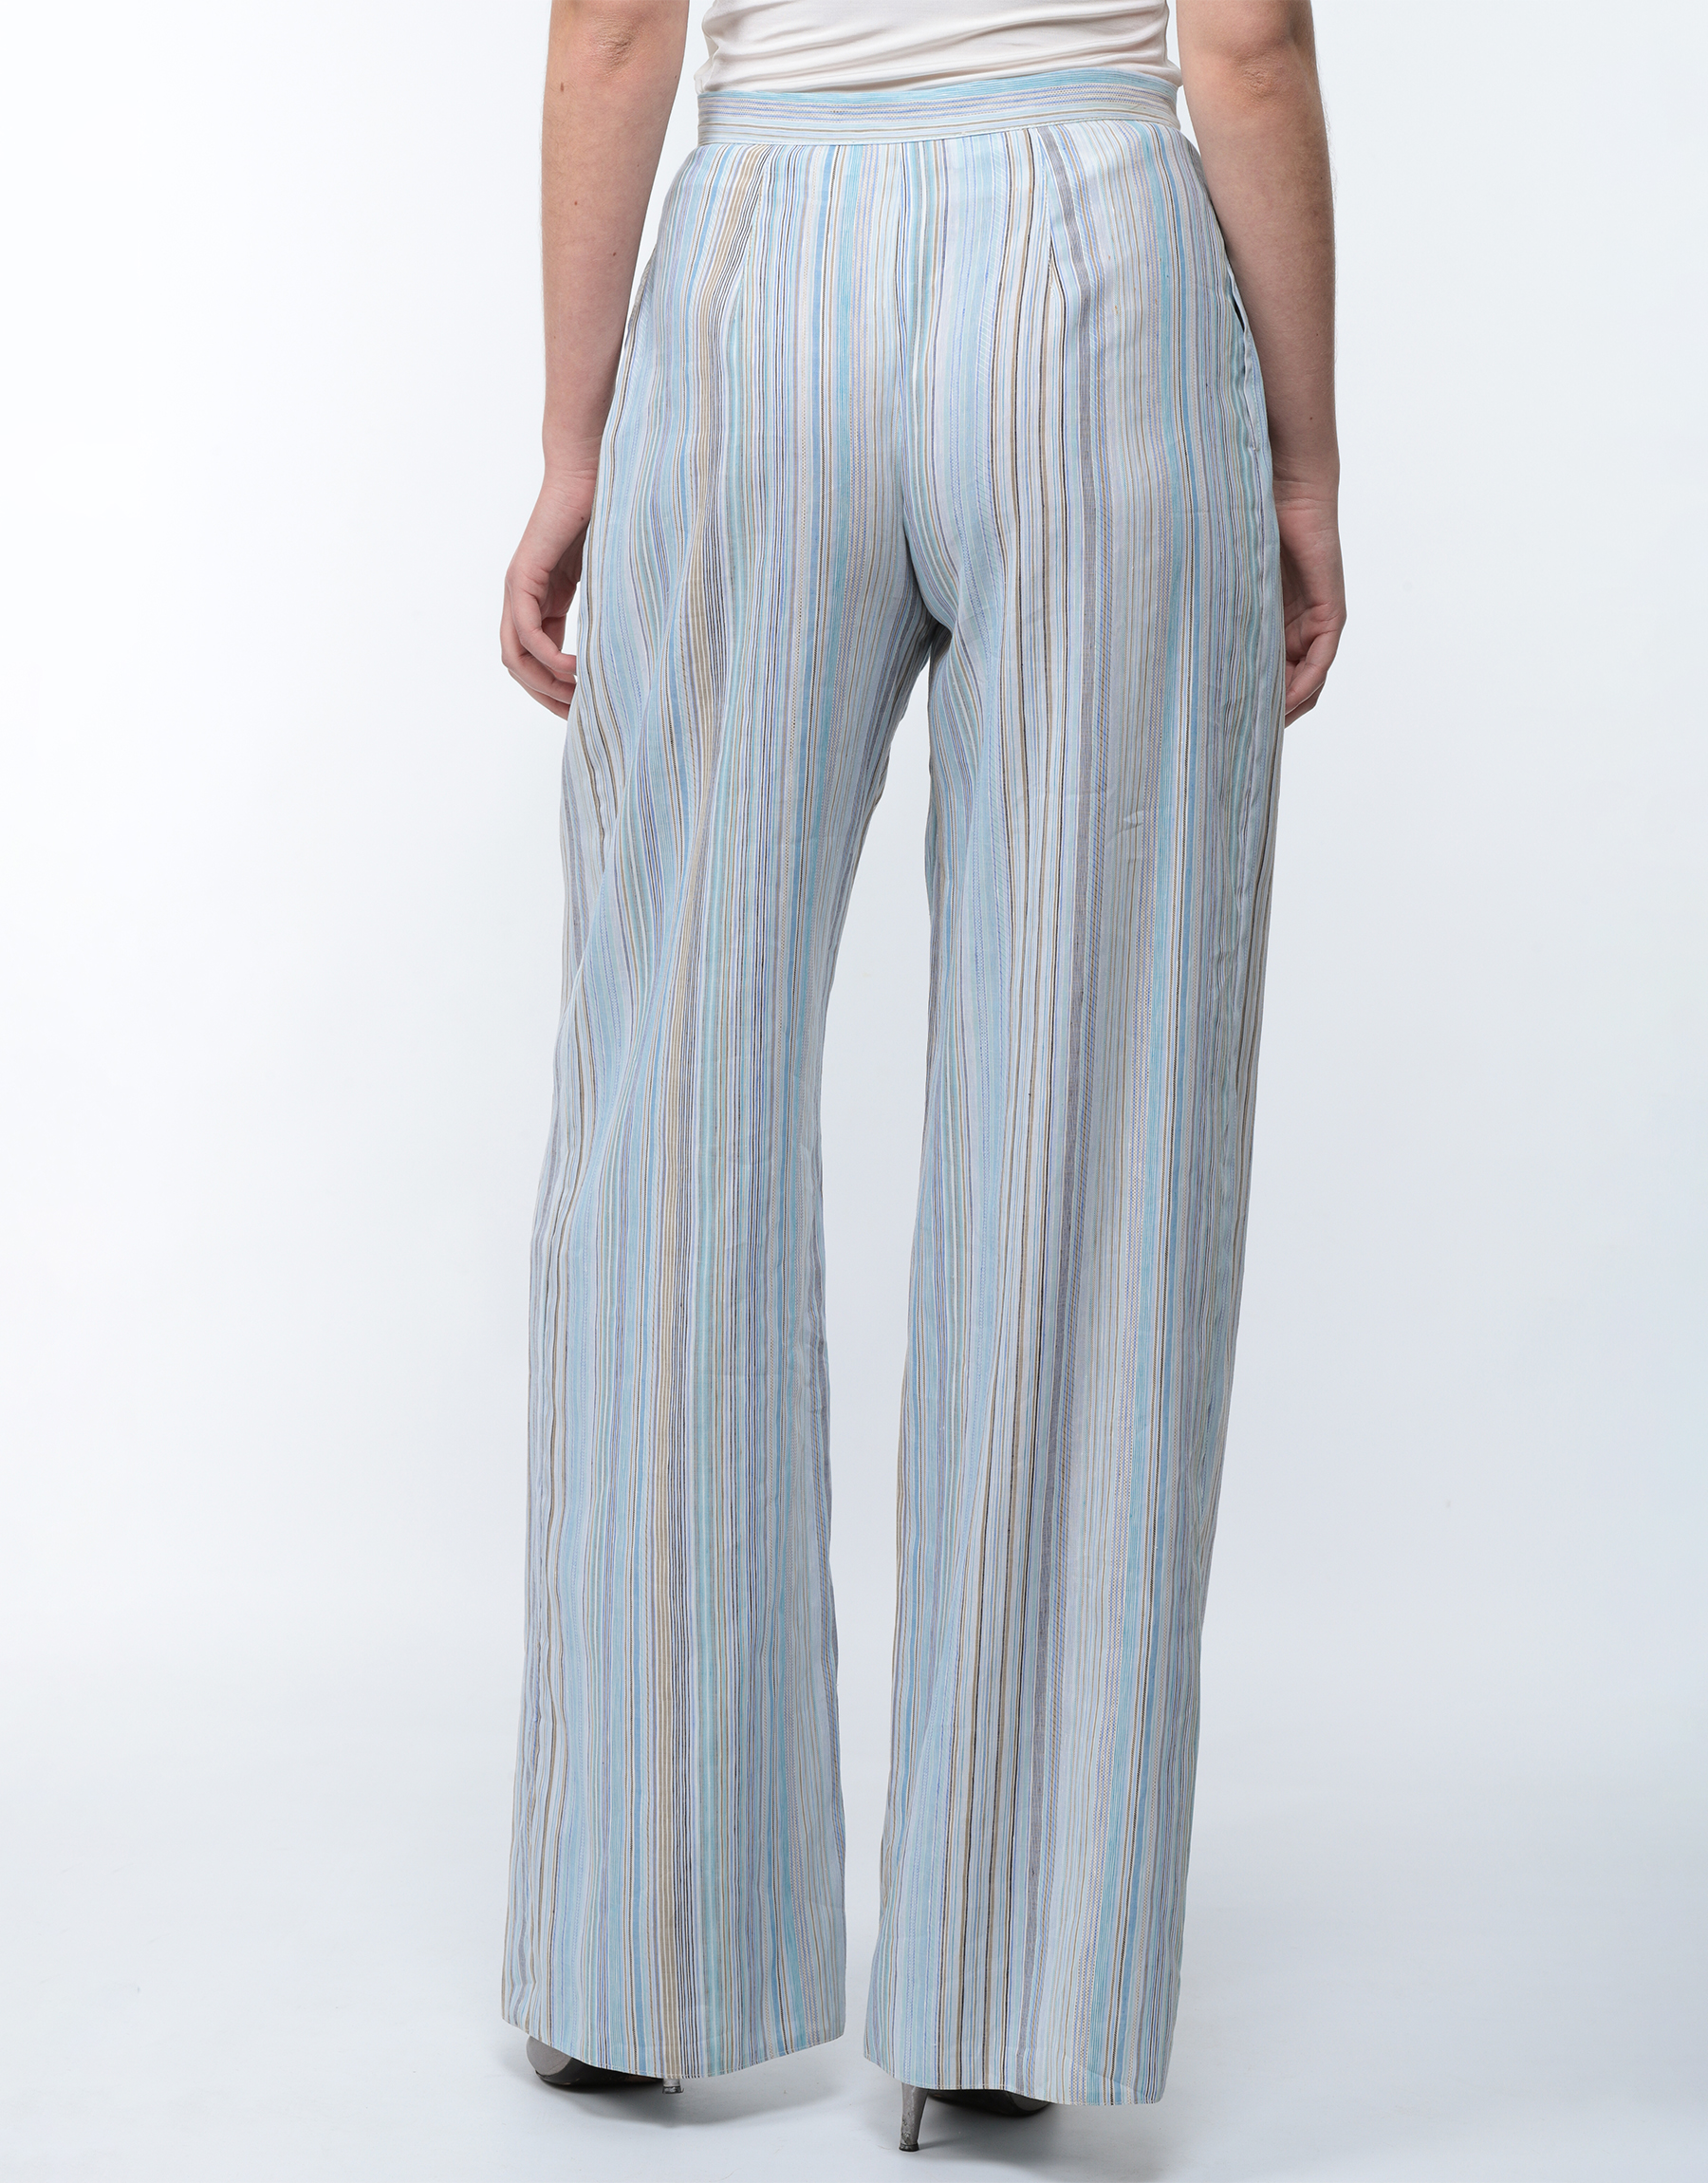 Cotton pleated trousers tennis stripes